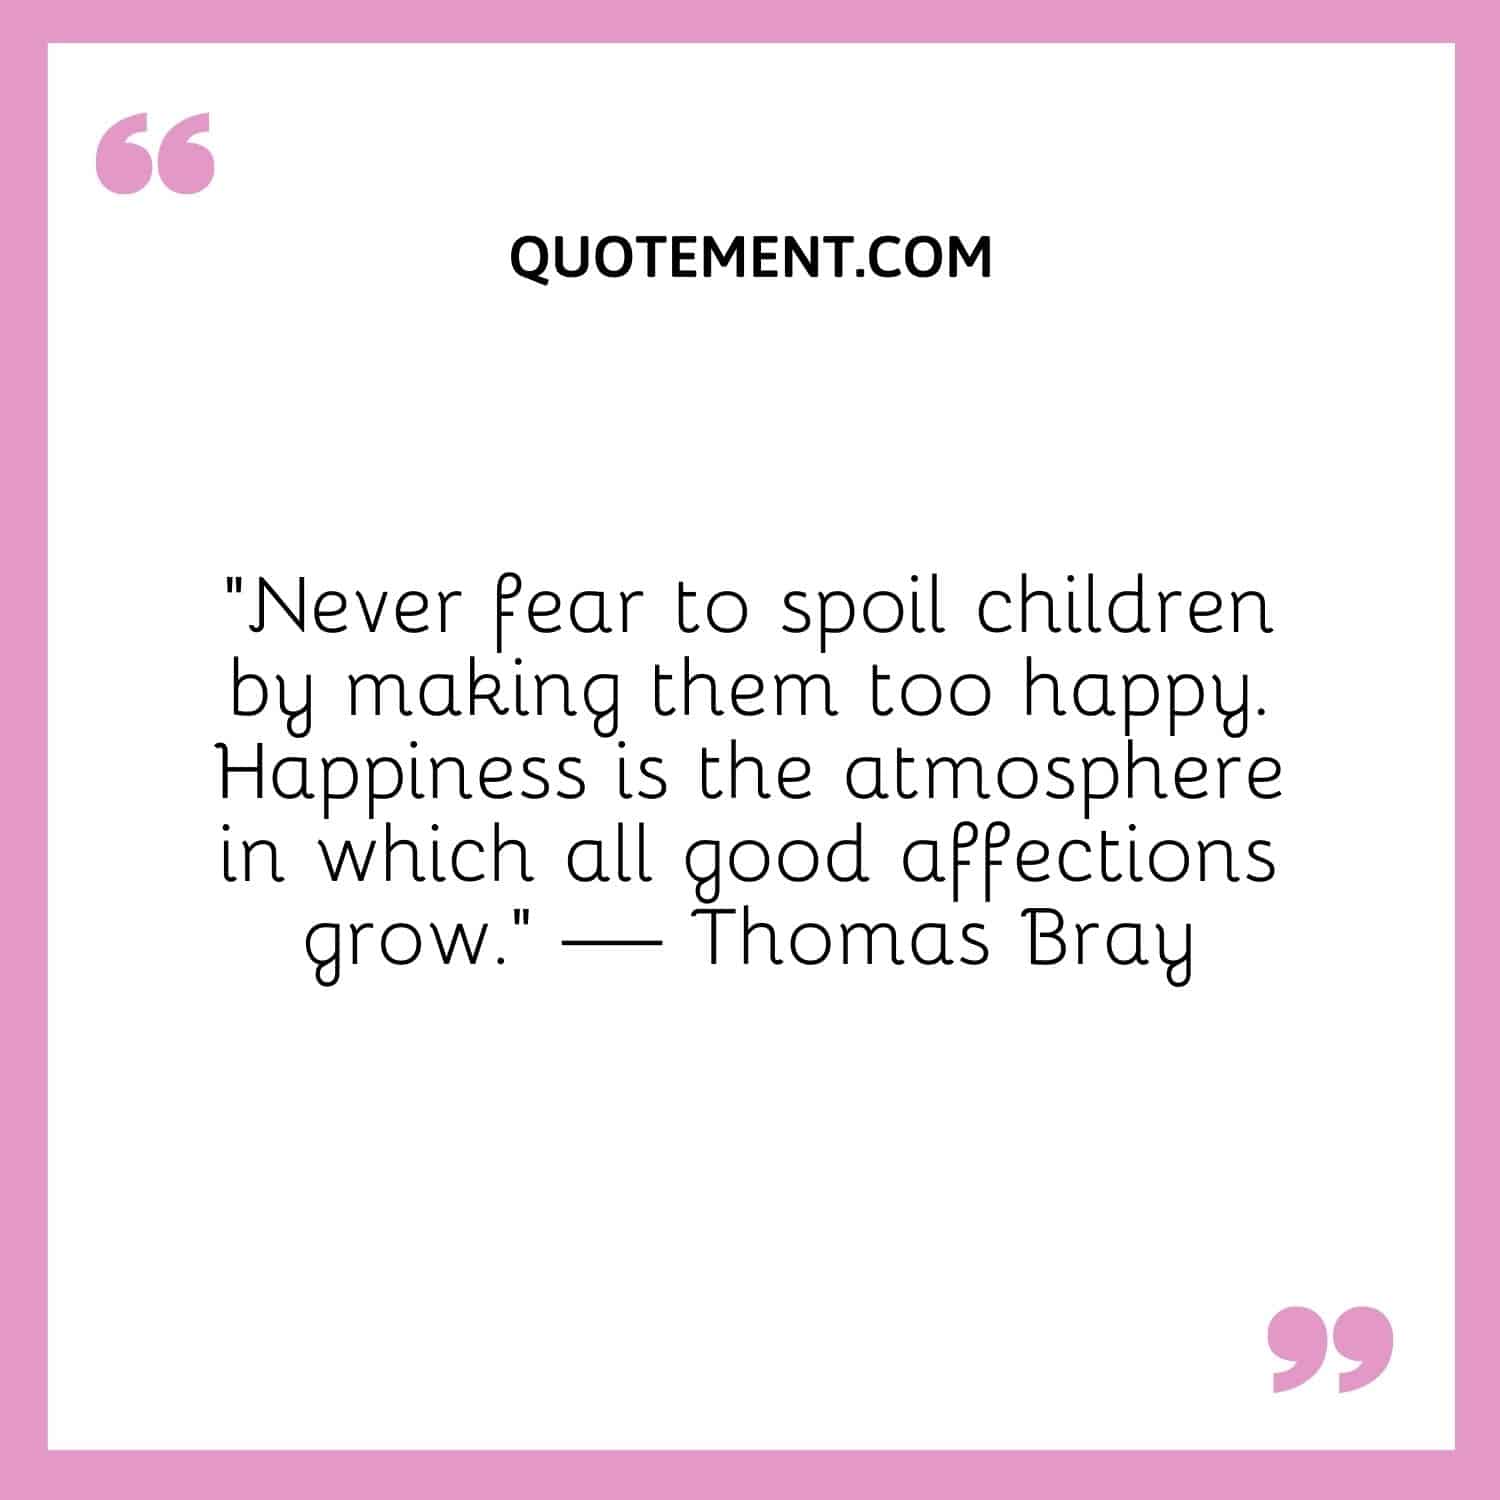 “Never fear to spoil children by making them too happy. Happiness is the atmosphere in which all good affections grow.” — Thomas Bray